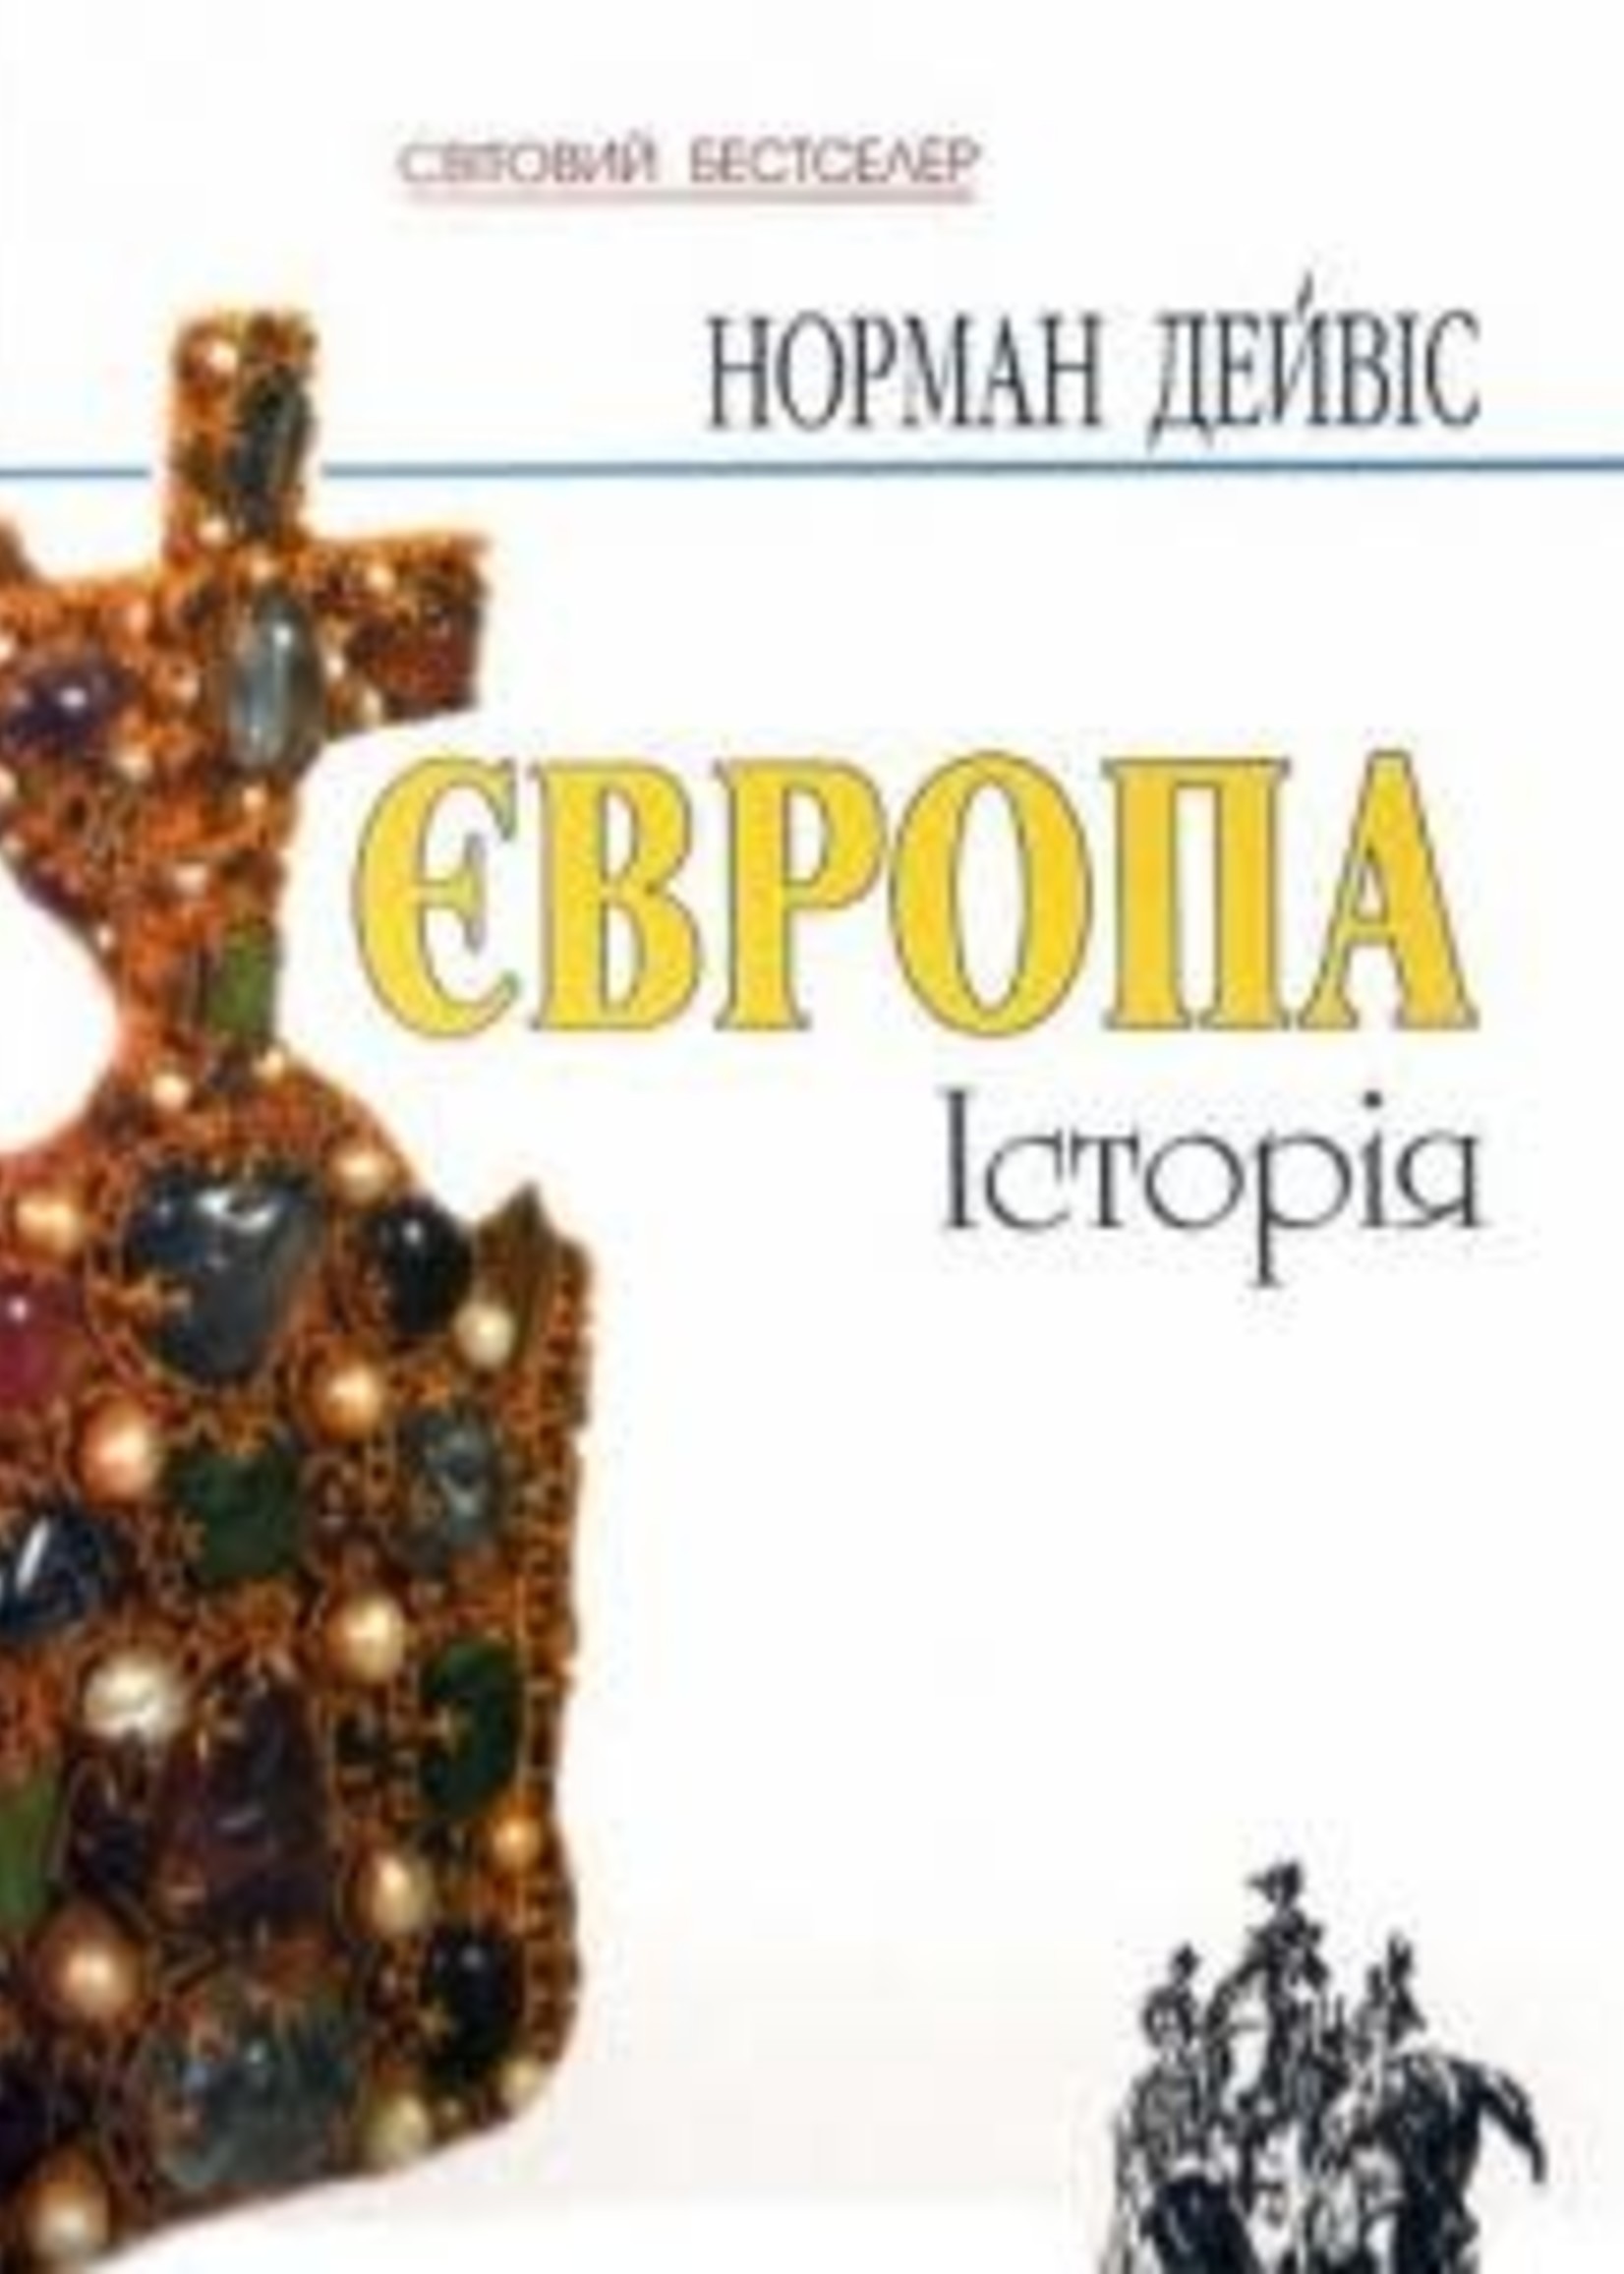 BOOK - EUROPE A History by Norman Davies in Ukrainian